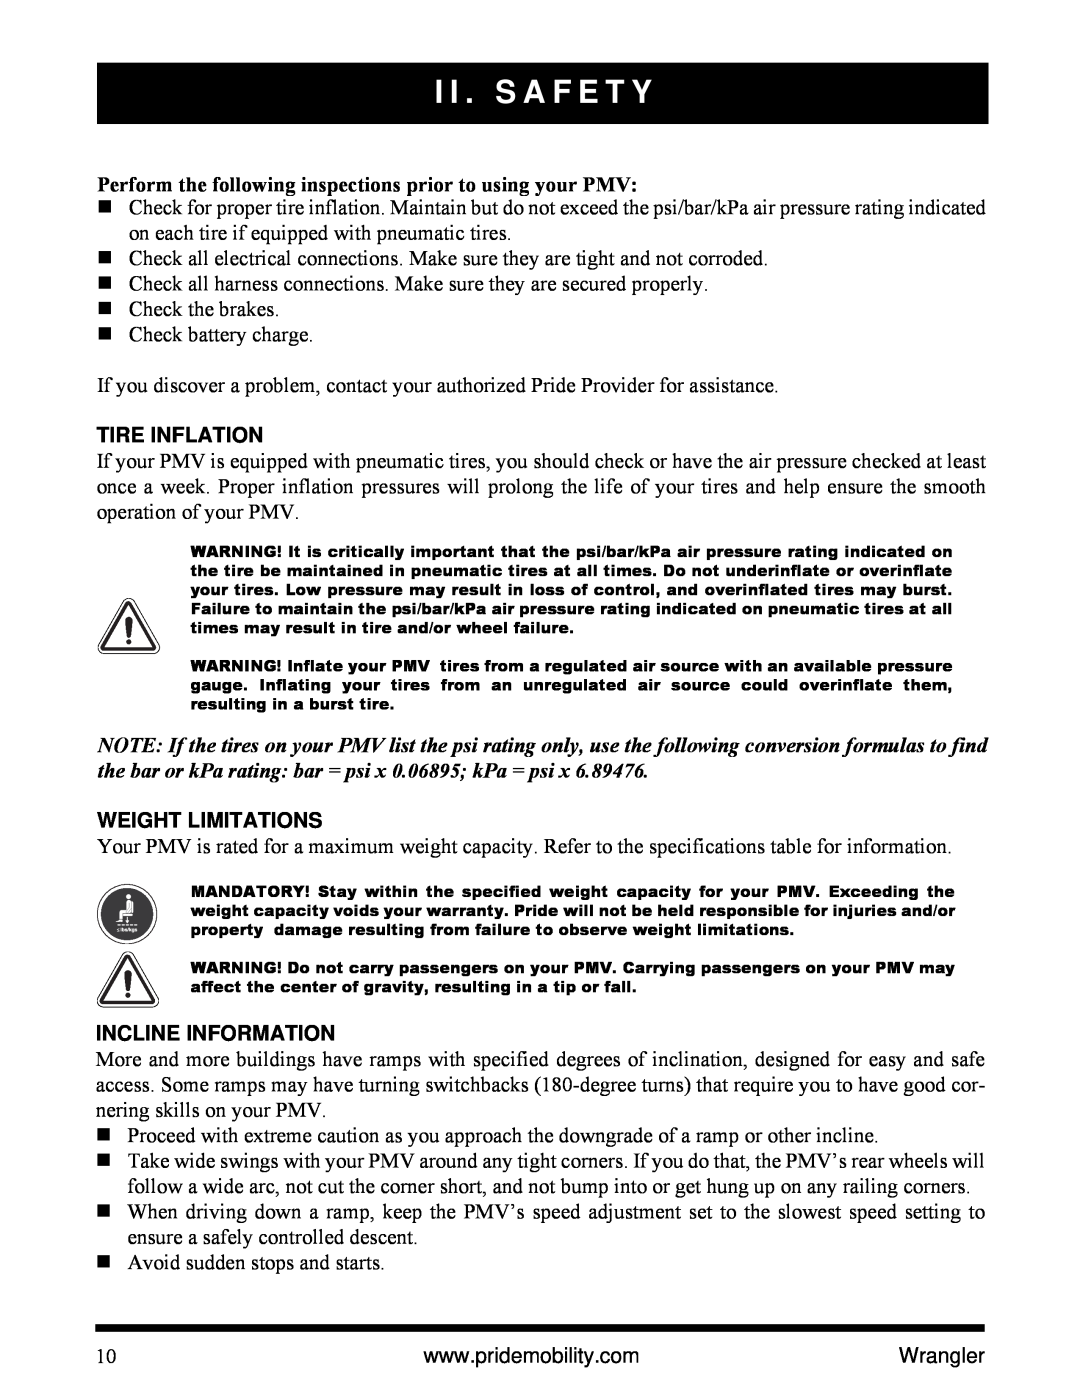 Pride Mobility I NFMANU1138 Perform the following inspections prior to using your PMV, Tire Inflation, Weight Limitations 